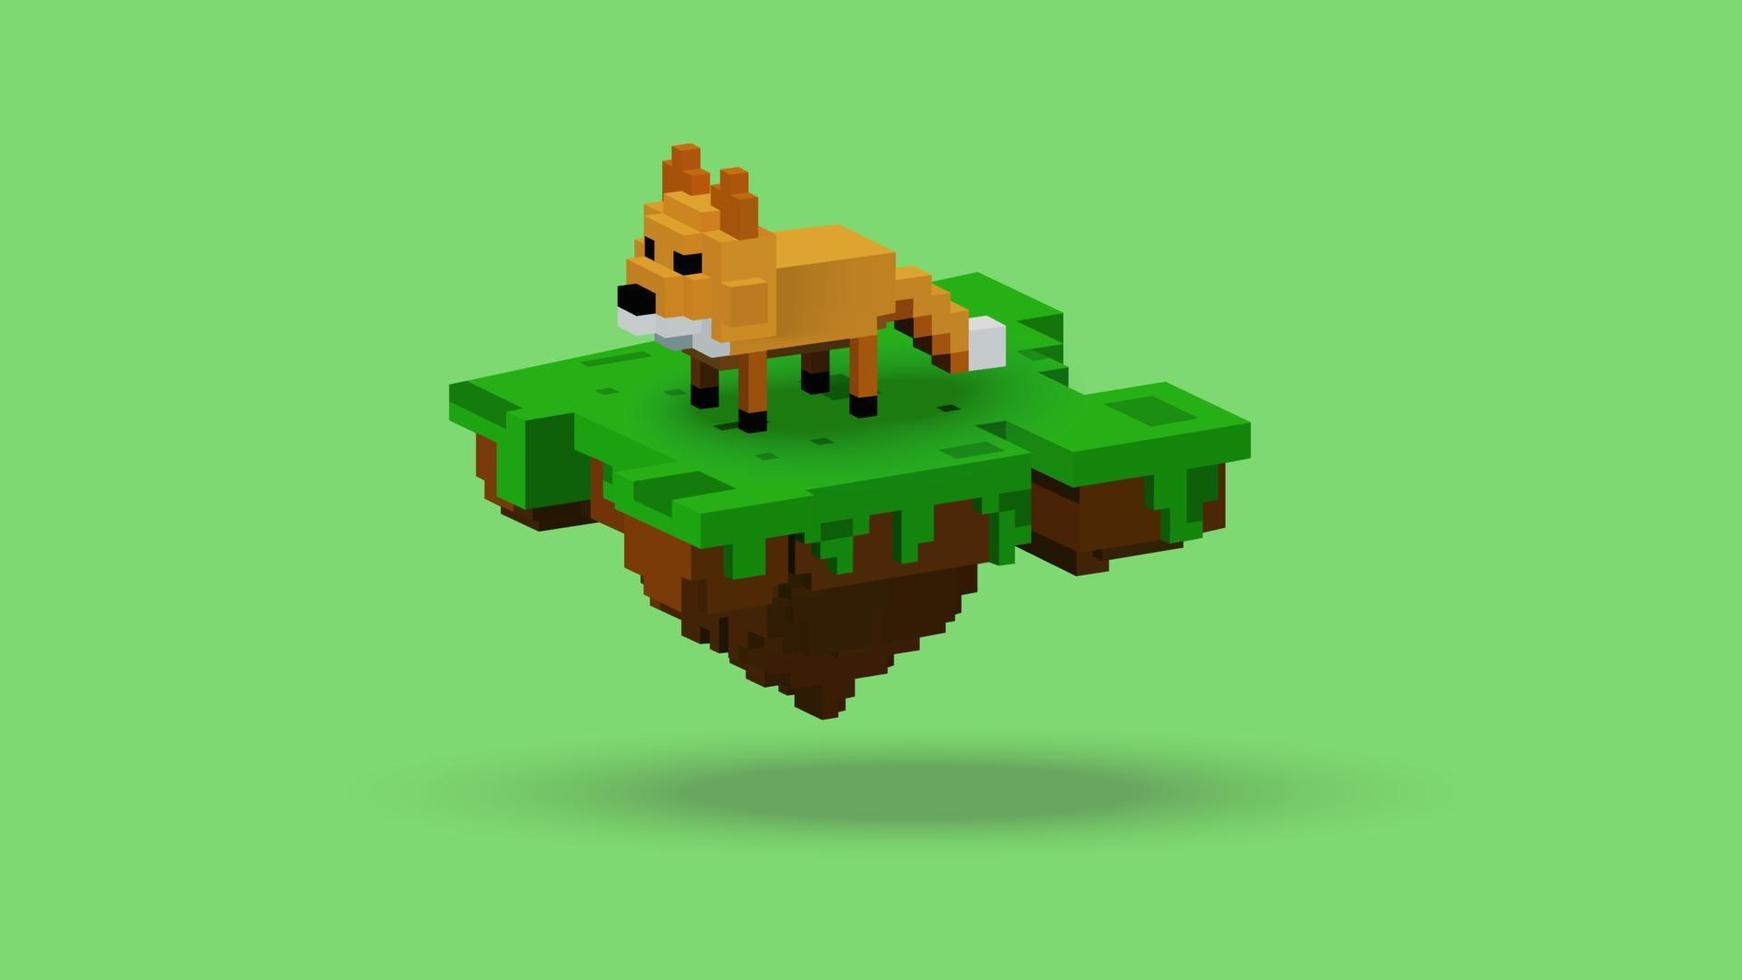 Vector graphic of 3D rendering fox animal on floating island with voxel style. Using orange, brown, black, green and white color scheme. Perfect for gaming character references